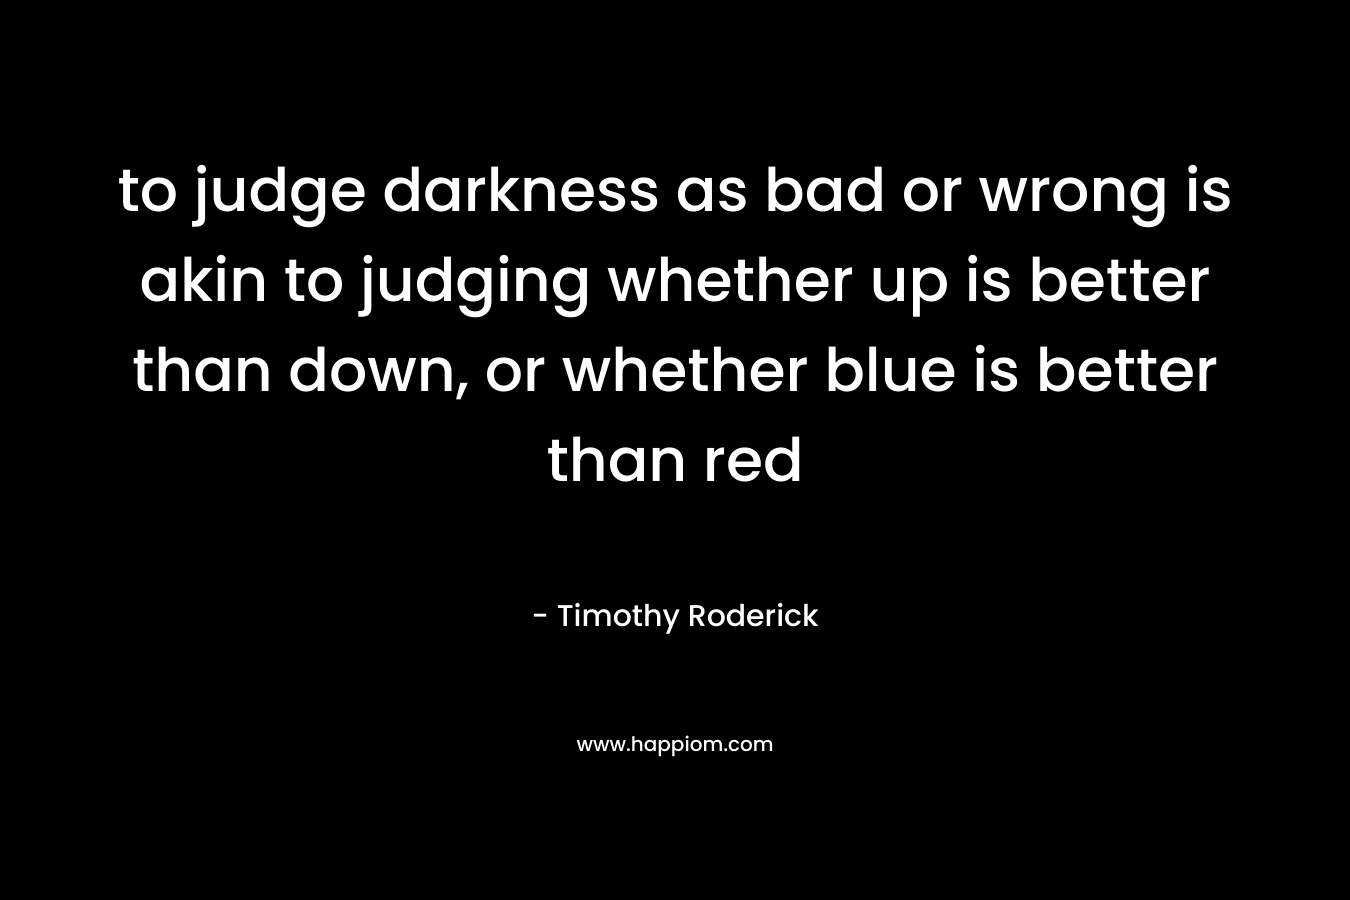 to judge darkness as bad or wrong is akin to judging whether up is better than down, or whether blue is better than red